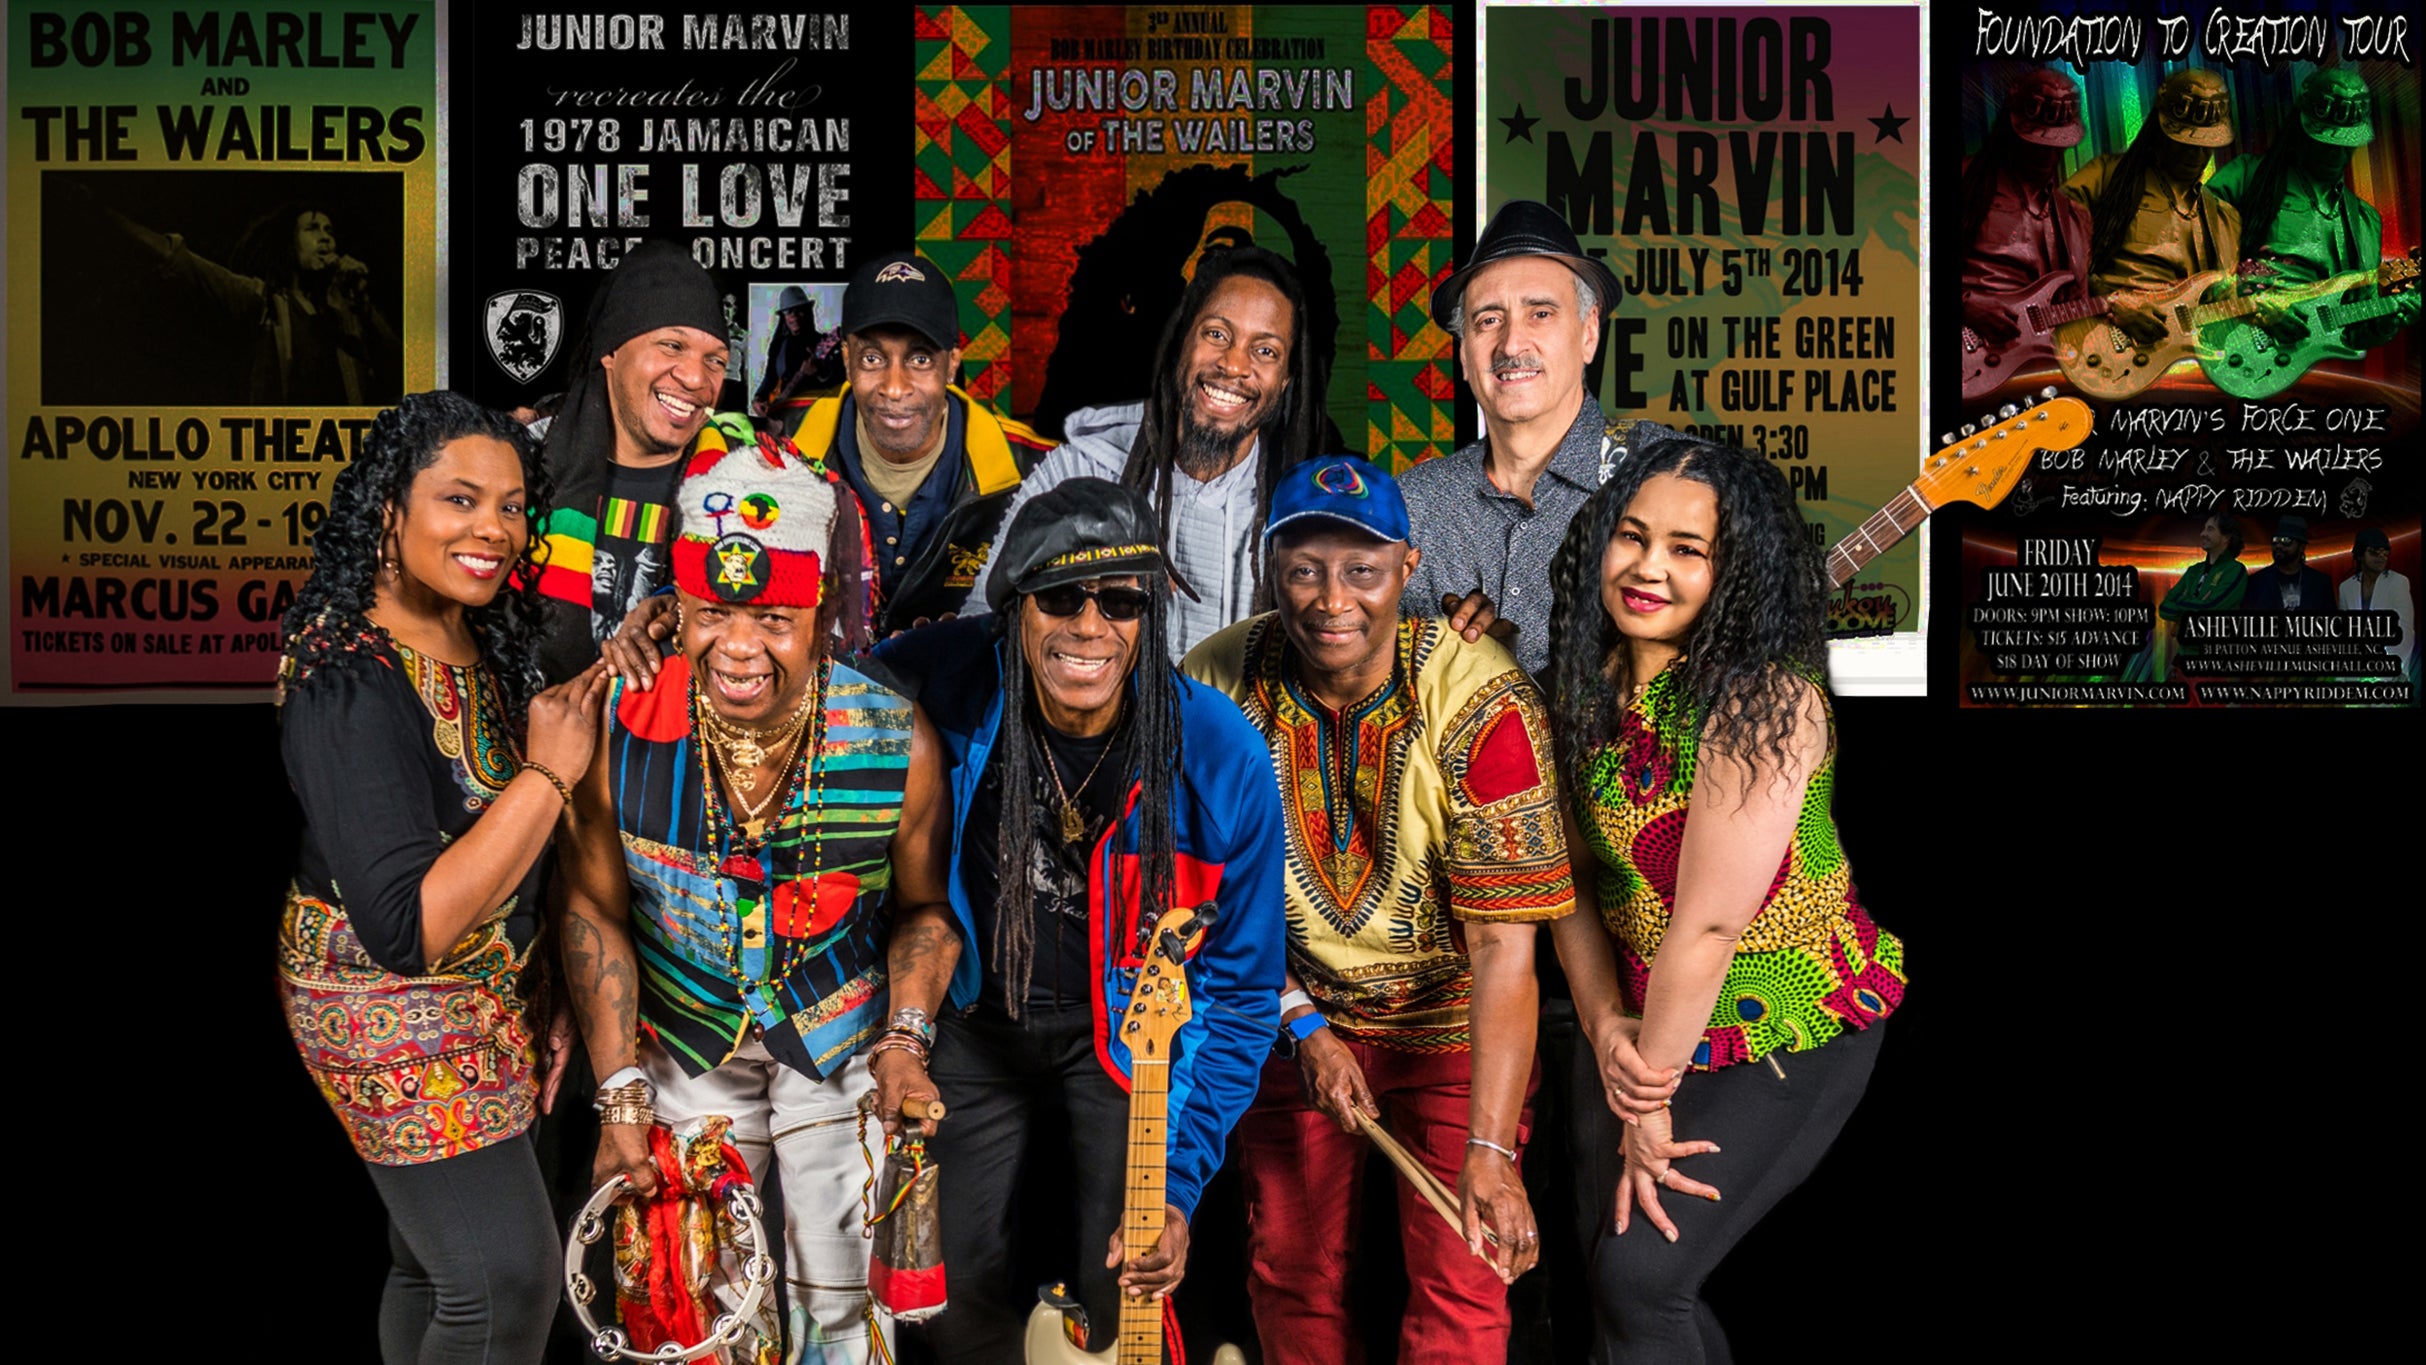 Junior Marvin & The Legendary Wailers in Huntington promo photo for Official Platinum presale offer code